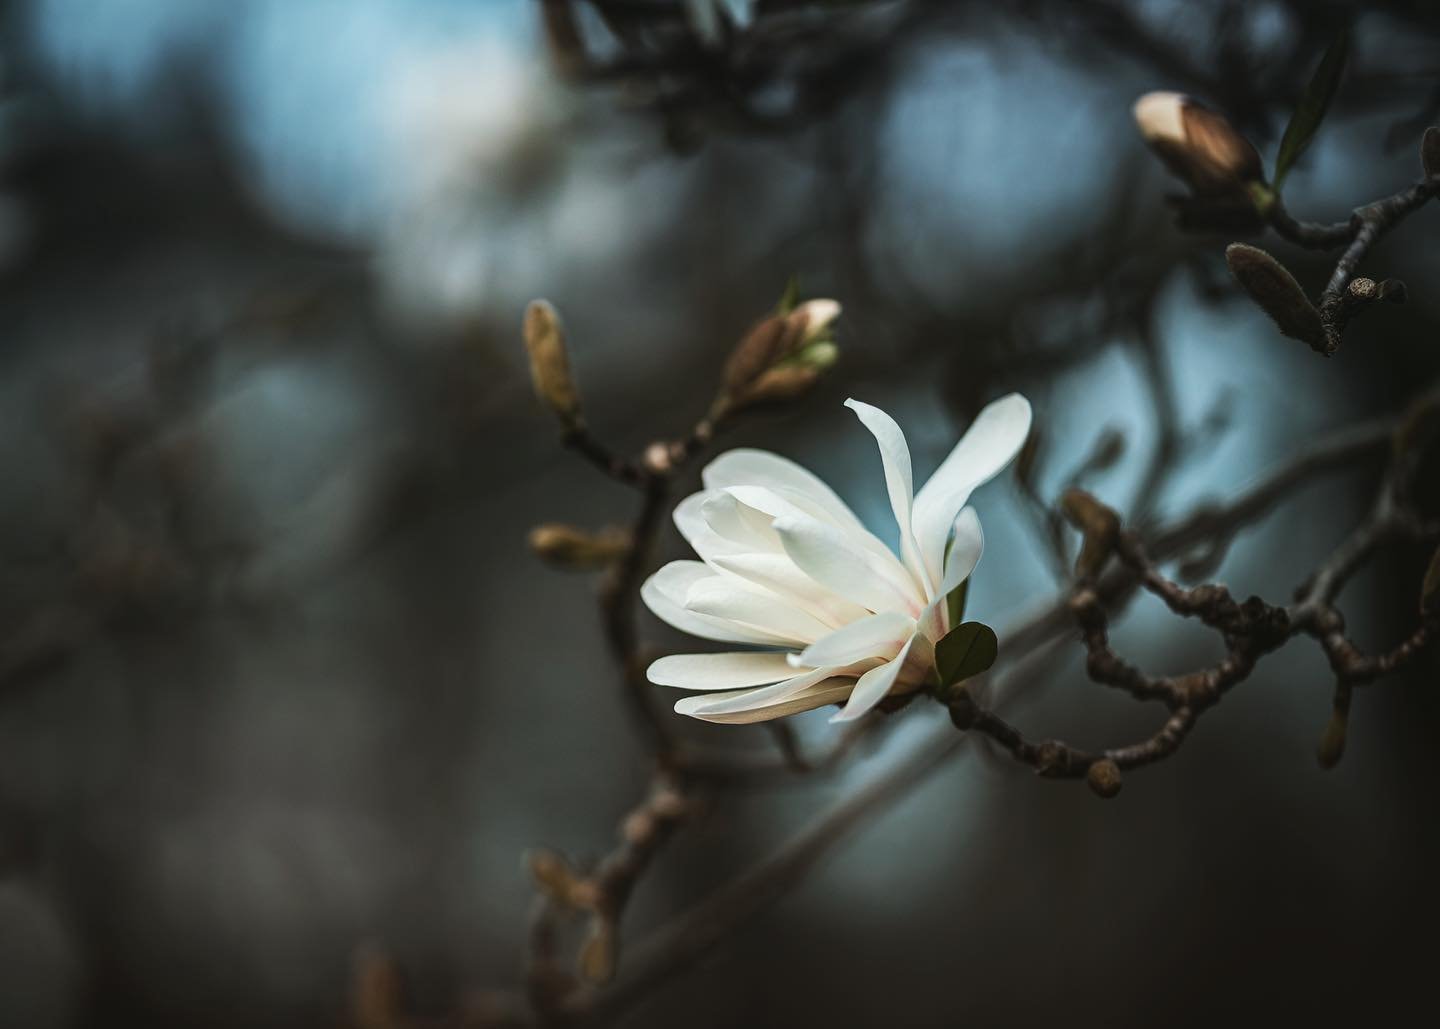 ．
&ldquo;I would like to give you the silver
branch, the small white flower, the one
word that will protect you
from the grief at the center
of your dream, from the grief
at the center.&rdquo;

Excerpt from &ldquo;Variation on the Word Sleep&rdquo; b